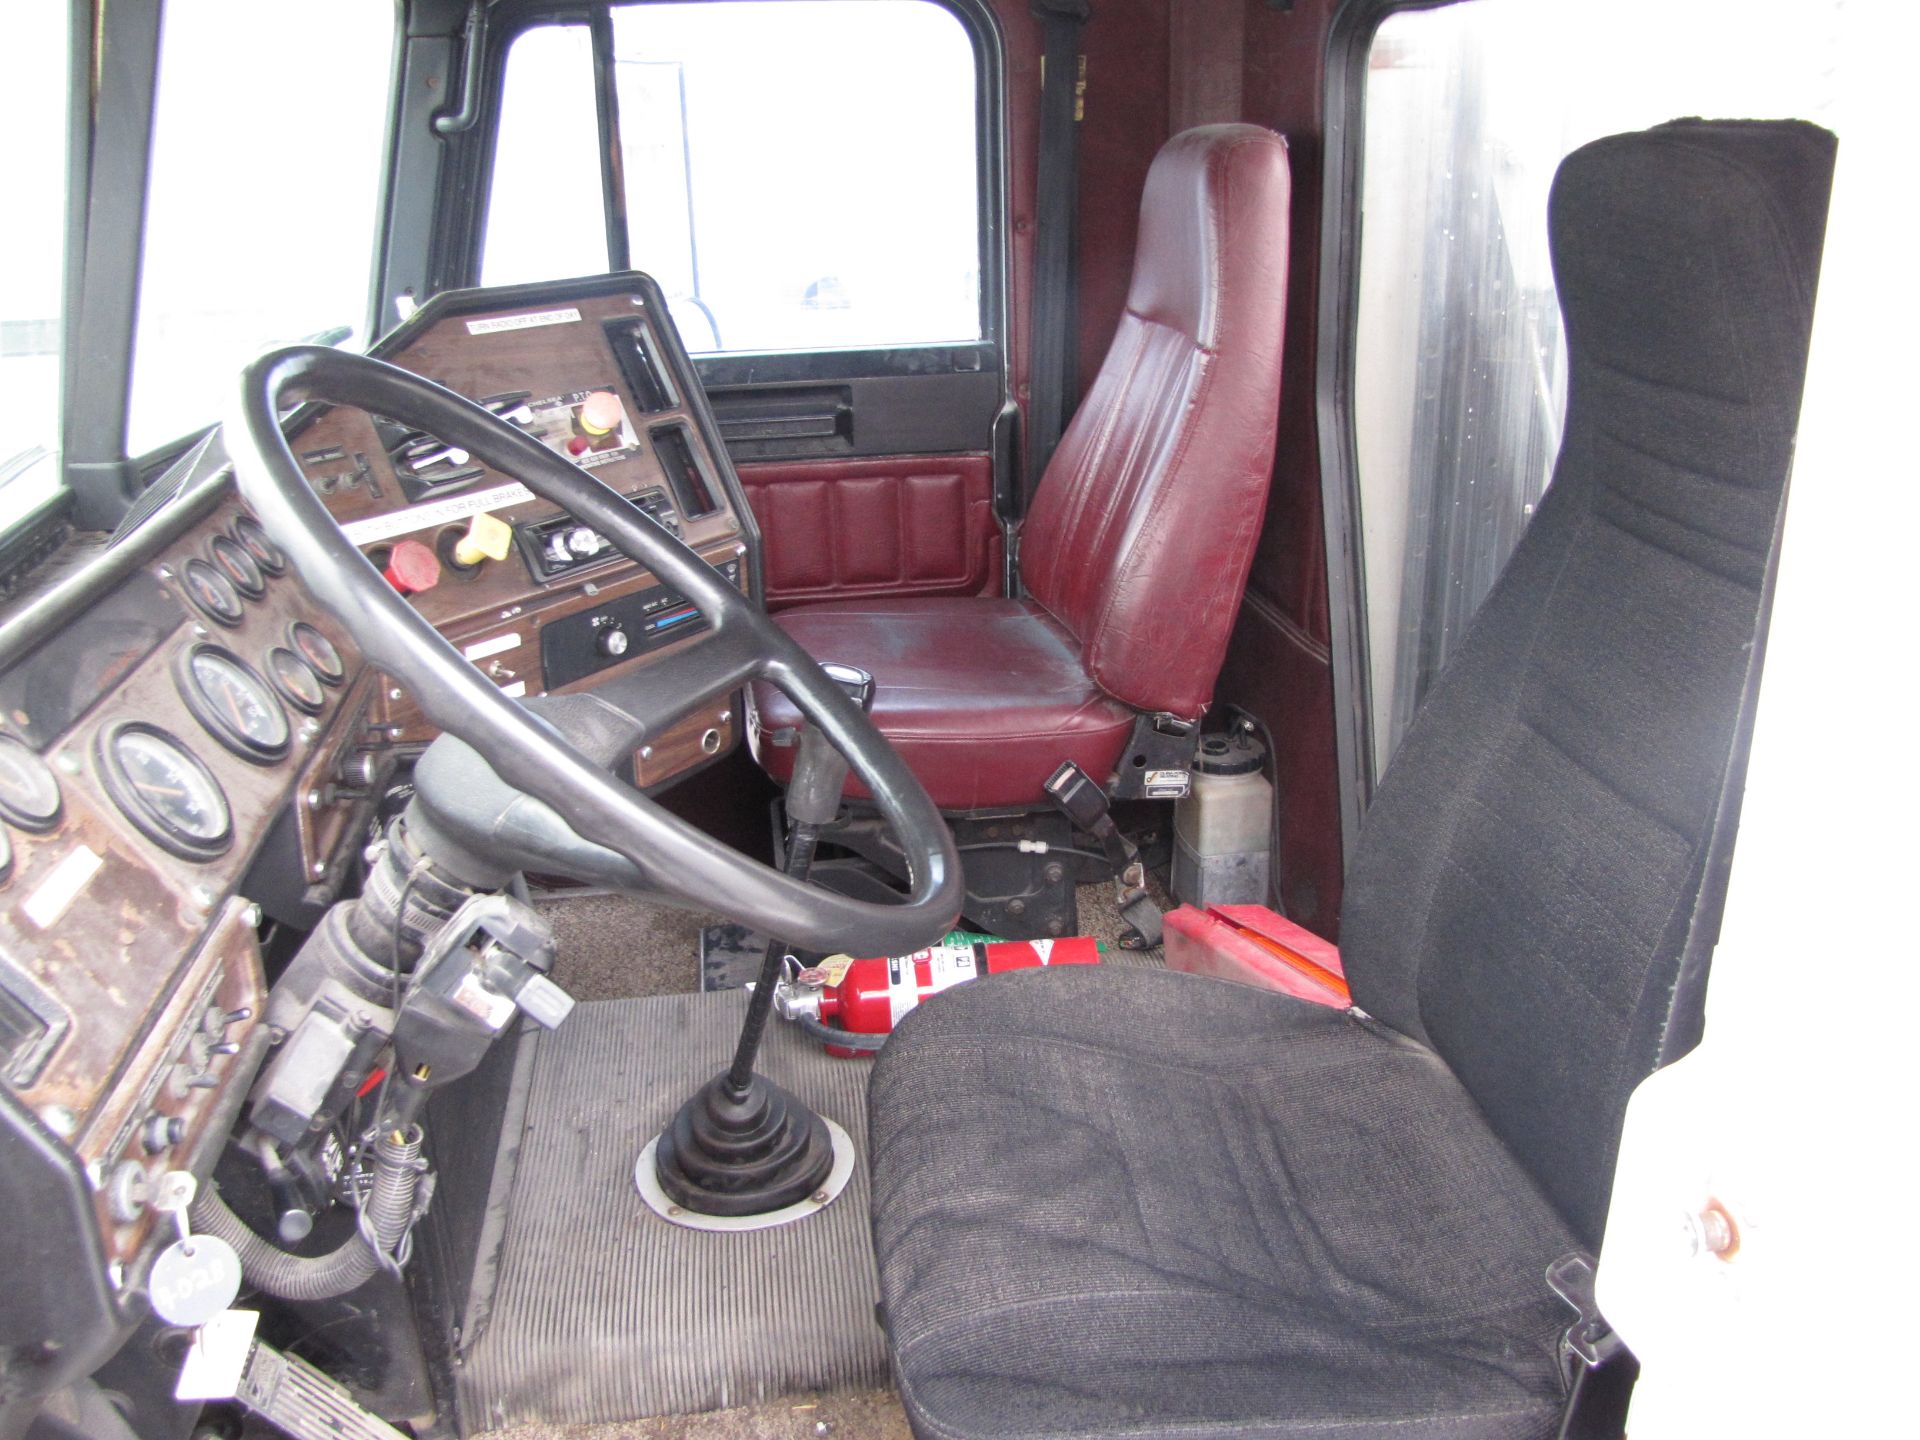 1993 Freightliner FLD120 semi truck - Image 60 of 71